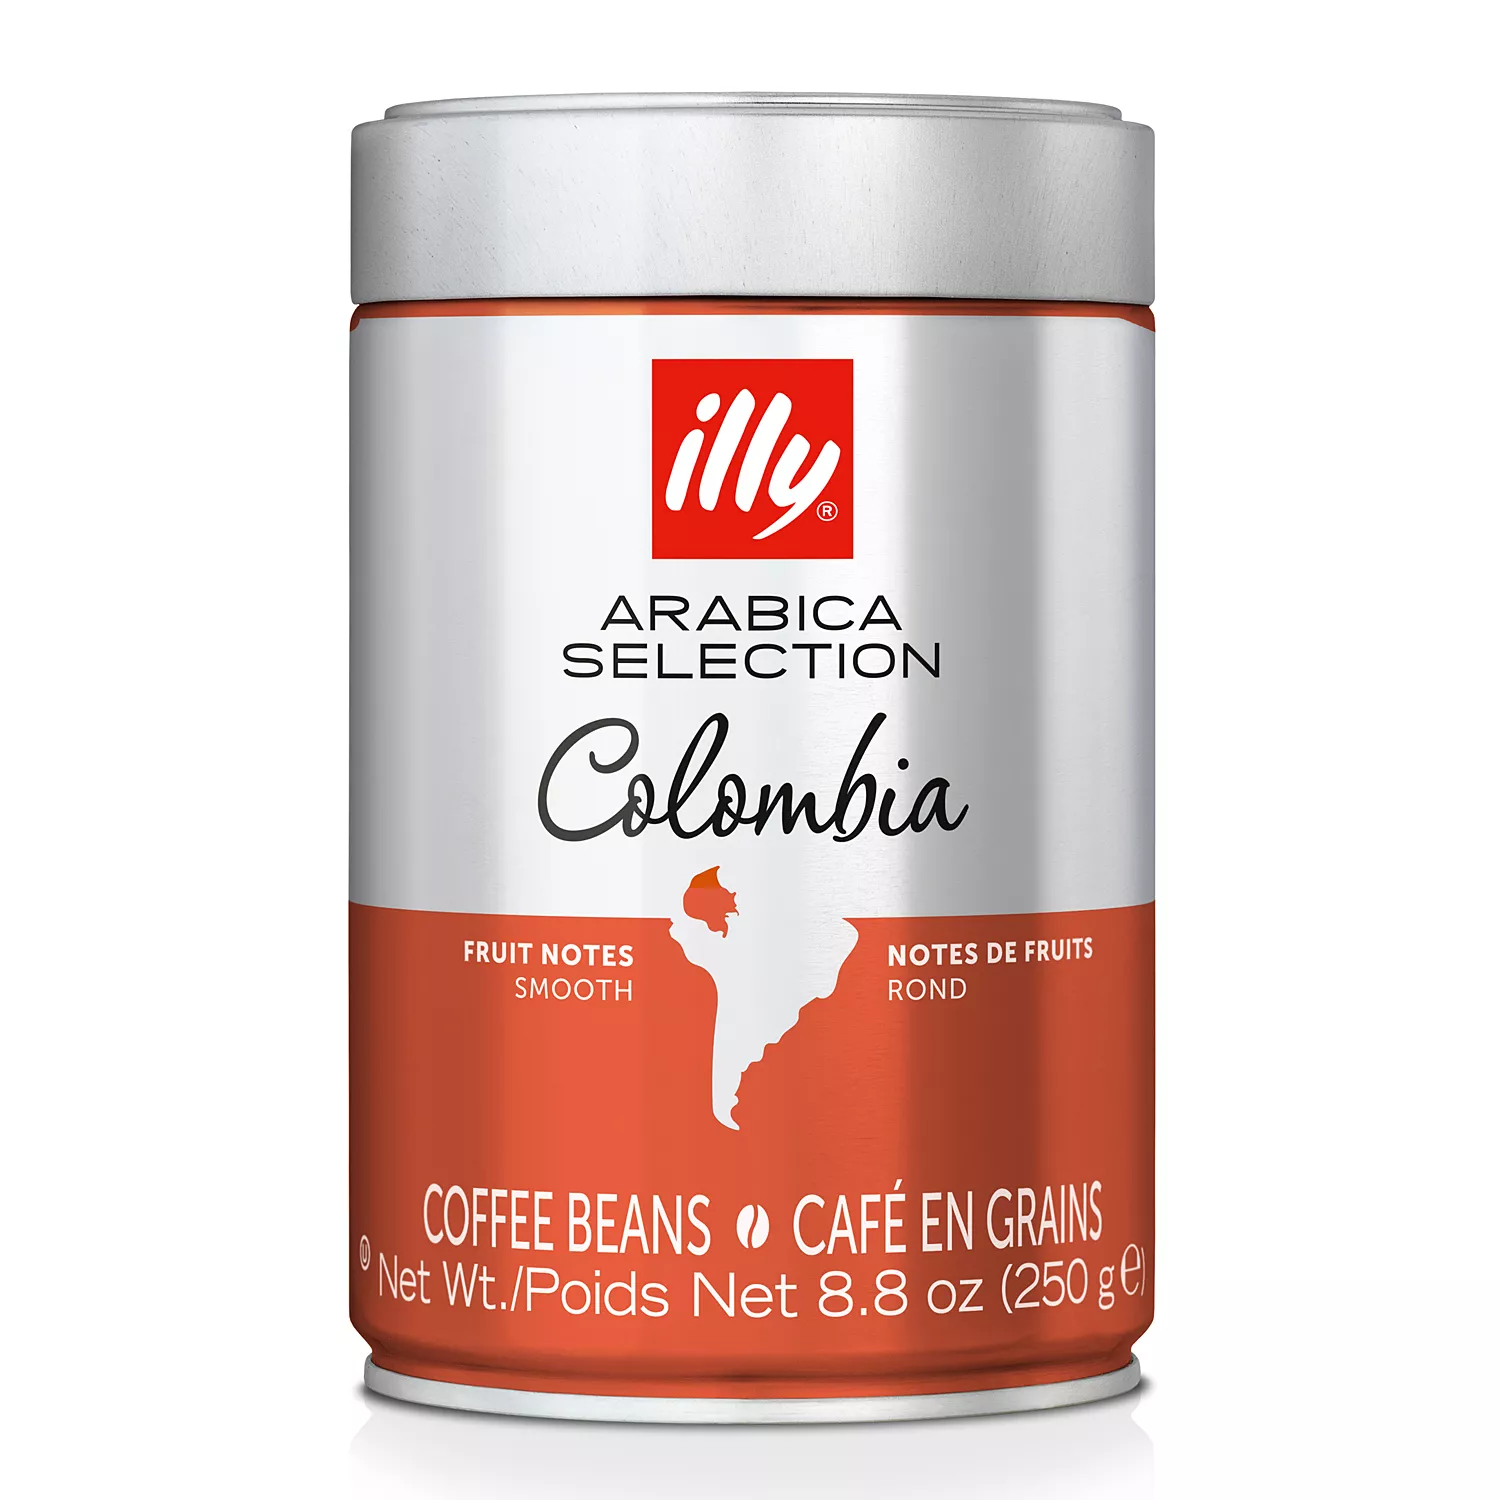 Illy Arabica Selection Coffee, Beans, Colombia - 8.8 oz